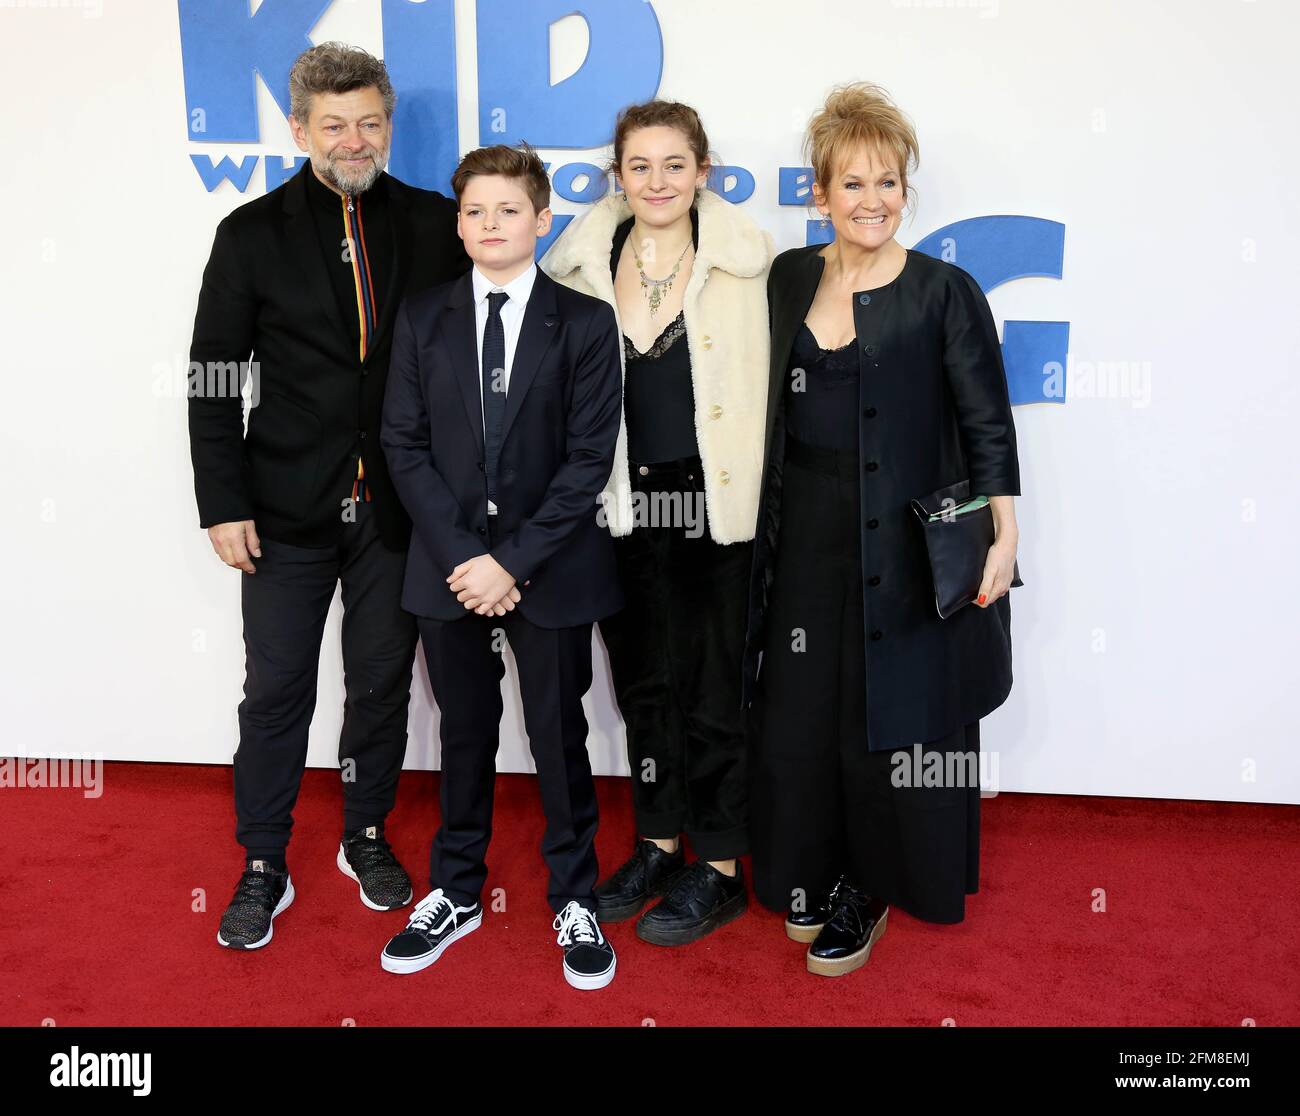 The Kid Who Would Be King Family Gala Screening